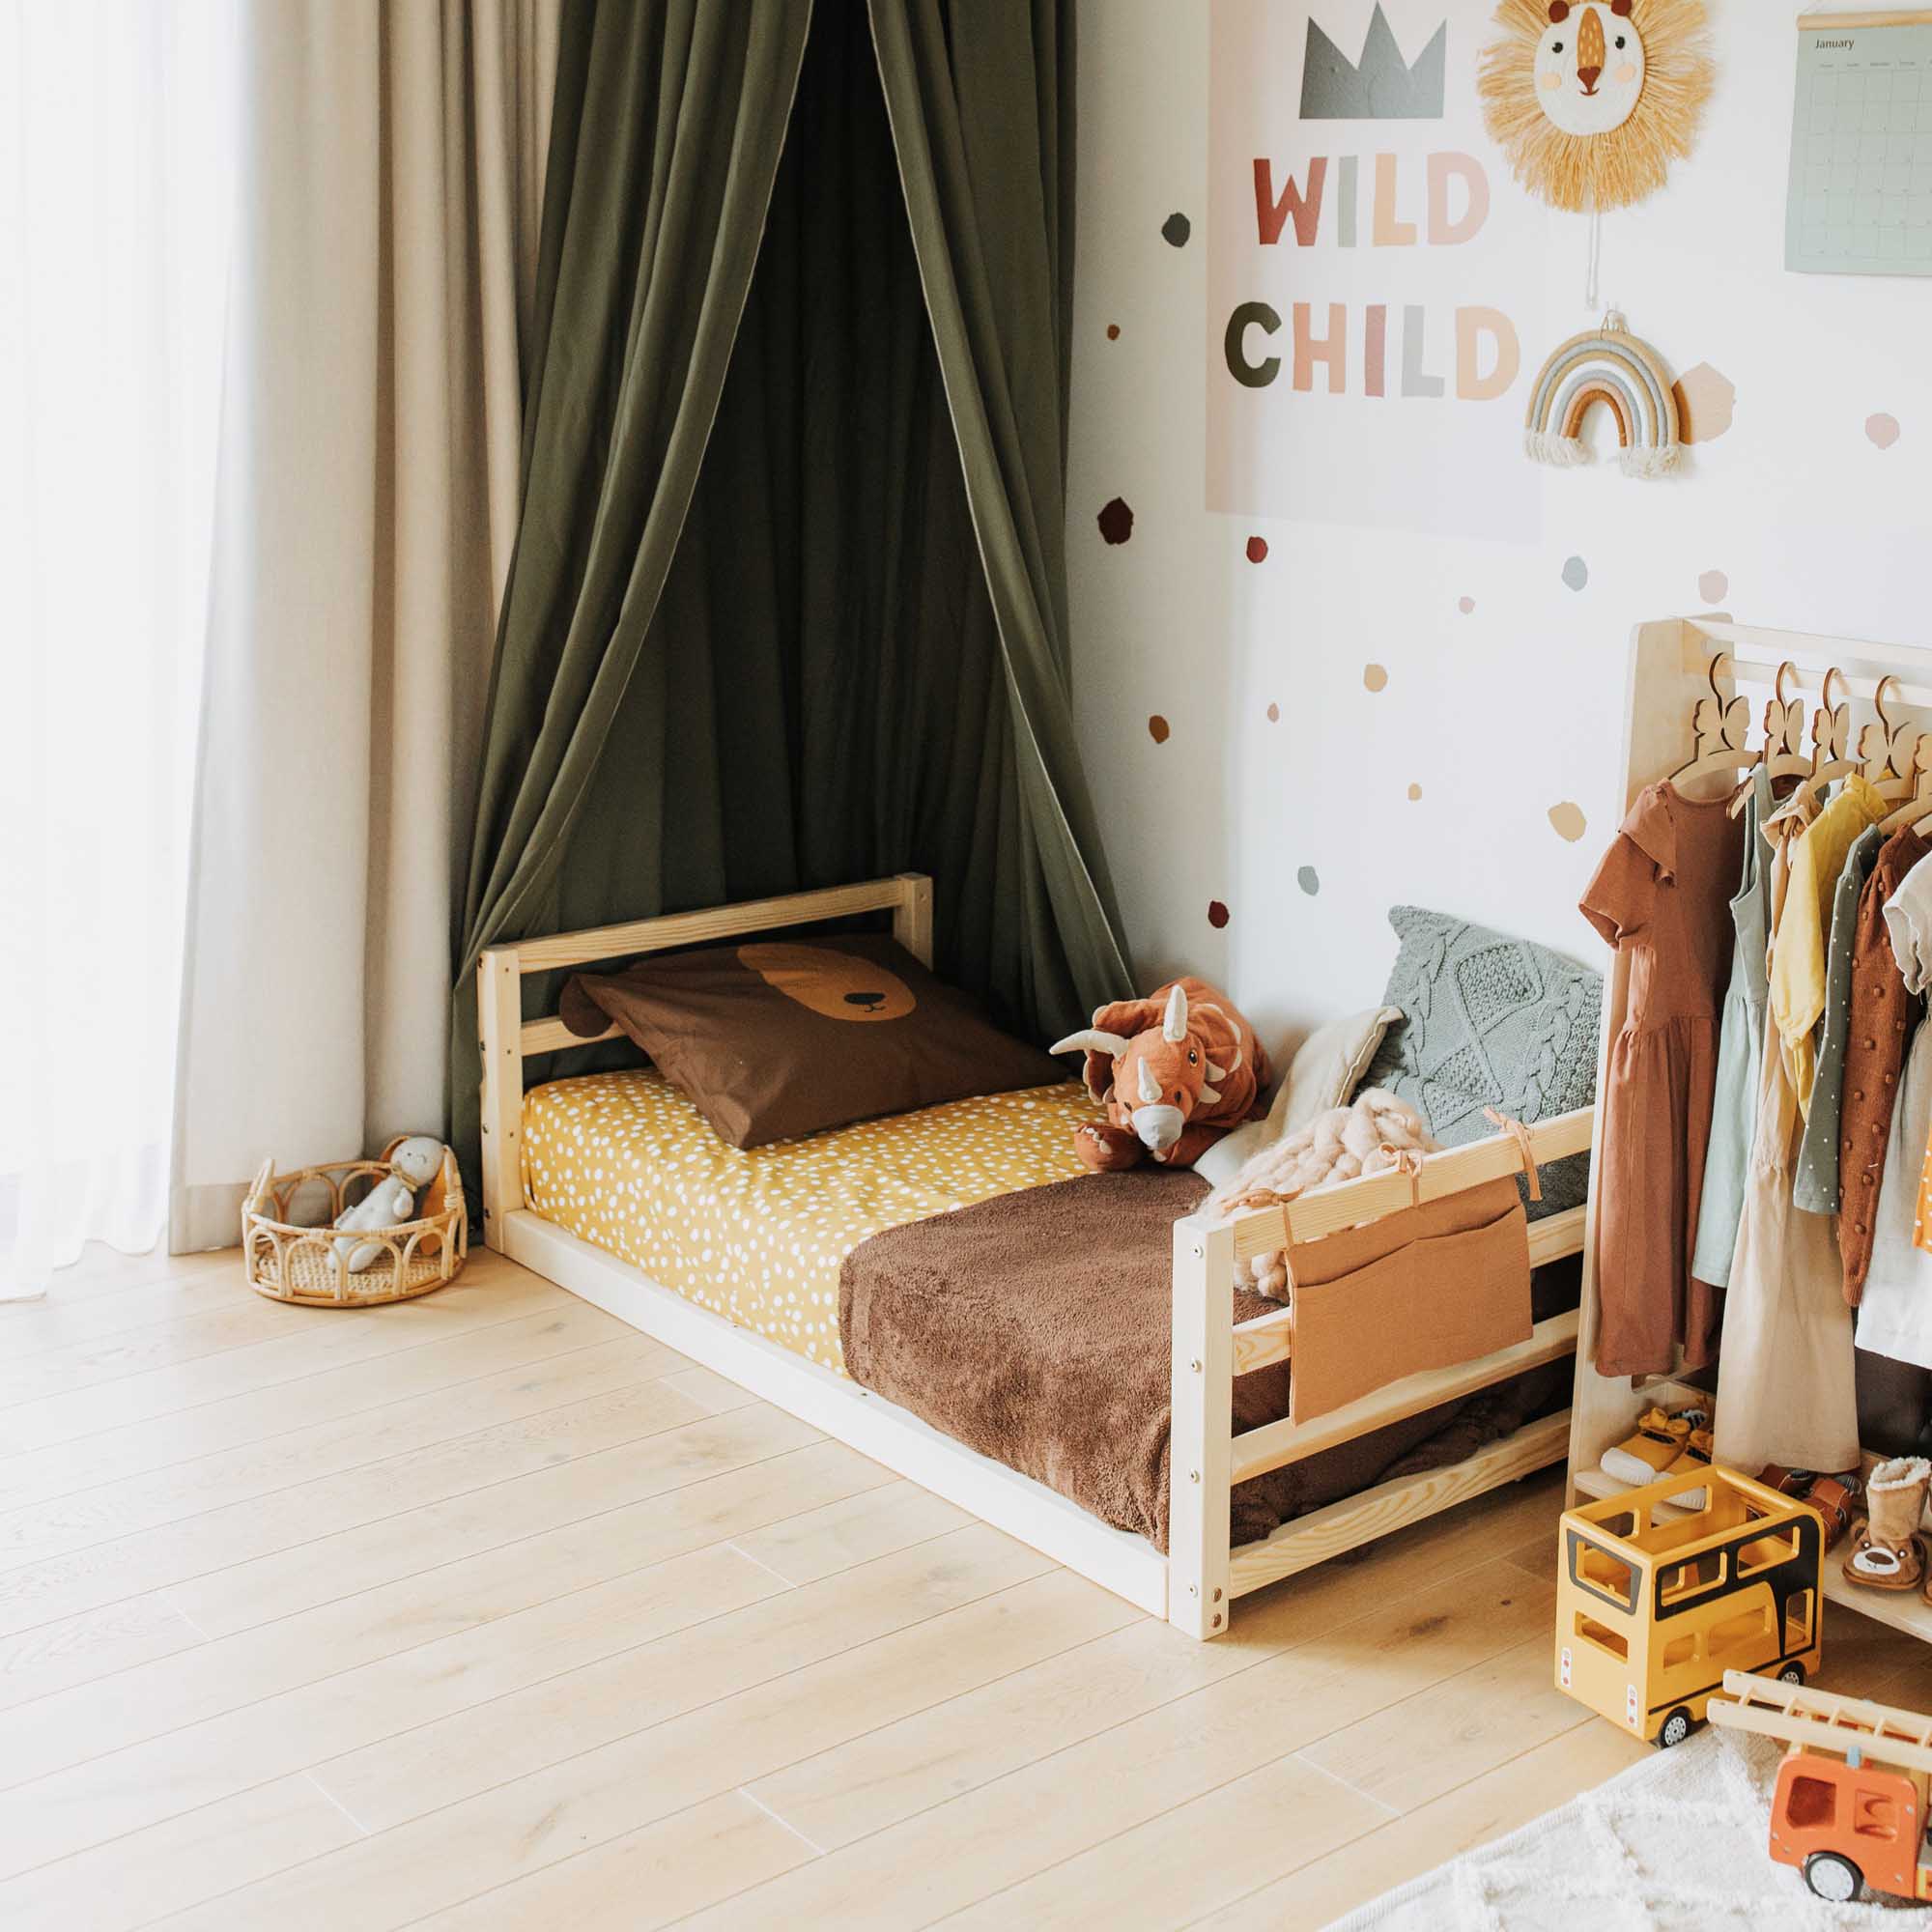 A child's room with a bed, clothes and toys.